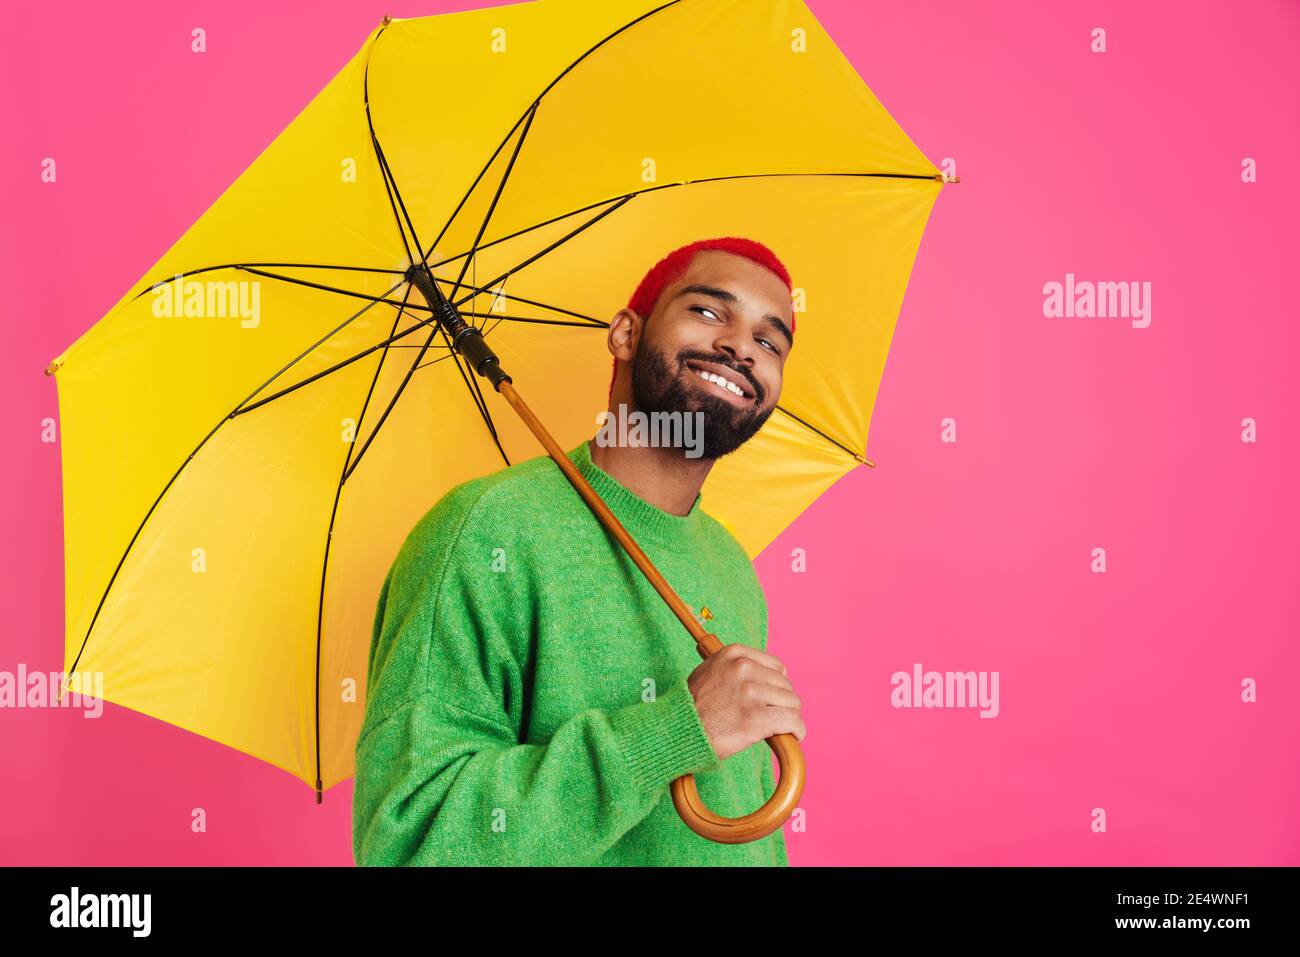 Free Photos - A Young Woman Walking In The Rain While Holding A Pink  Umbrella To Protect Herself From The Downpour. She Appears To Be Enjoying  The Moment And Poses For A